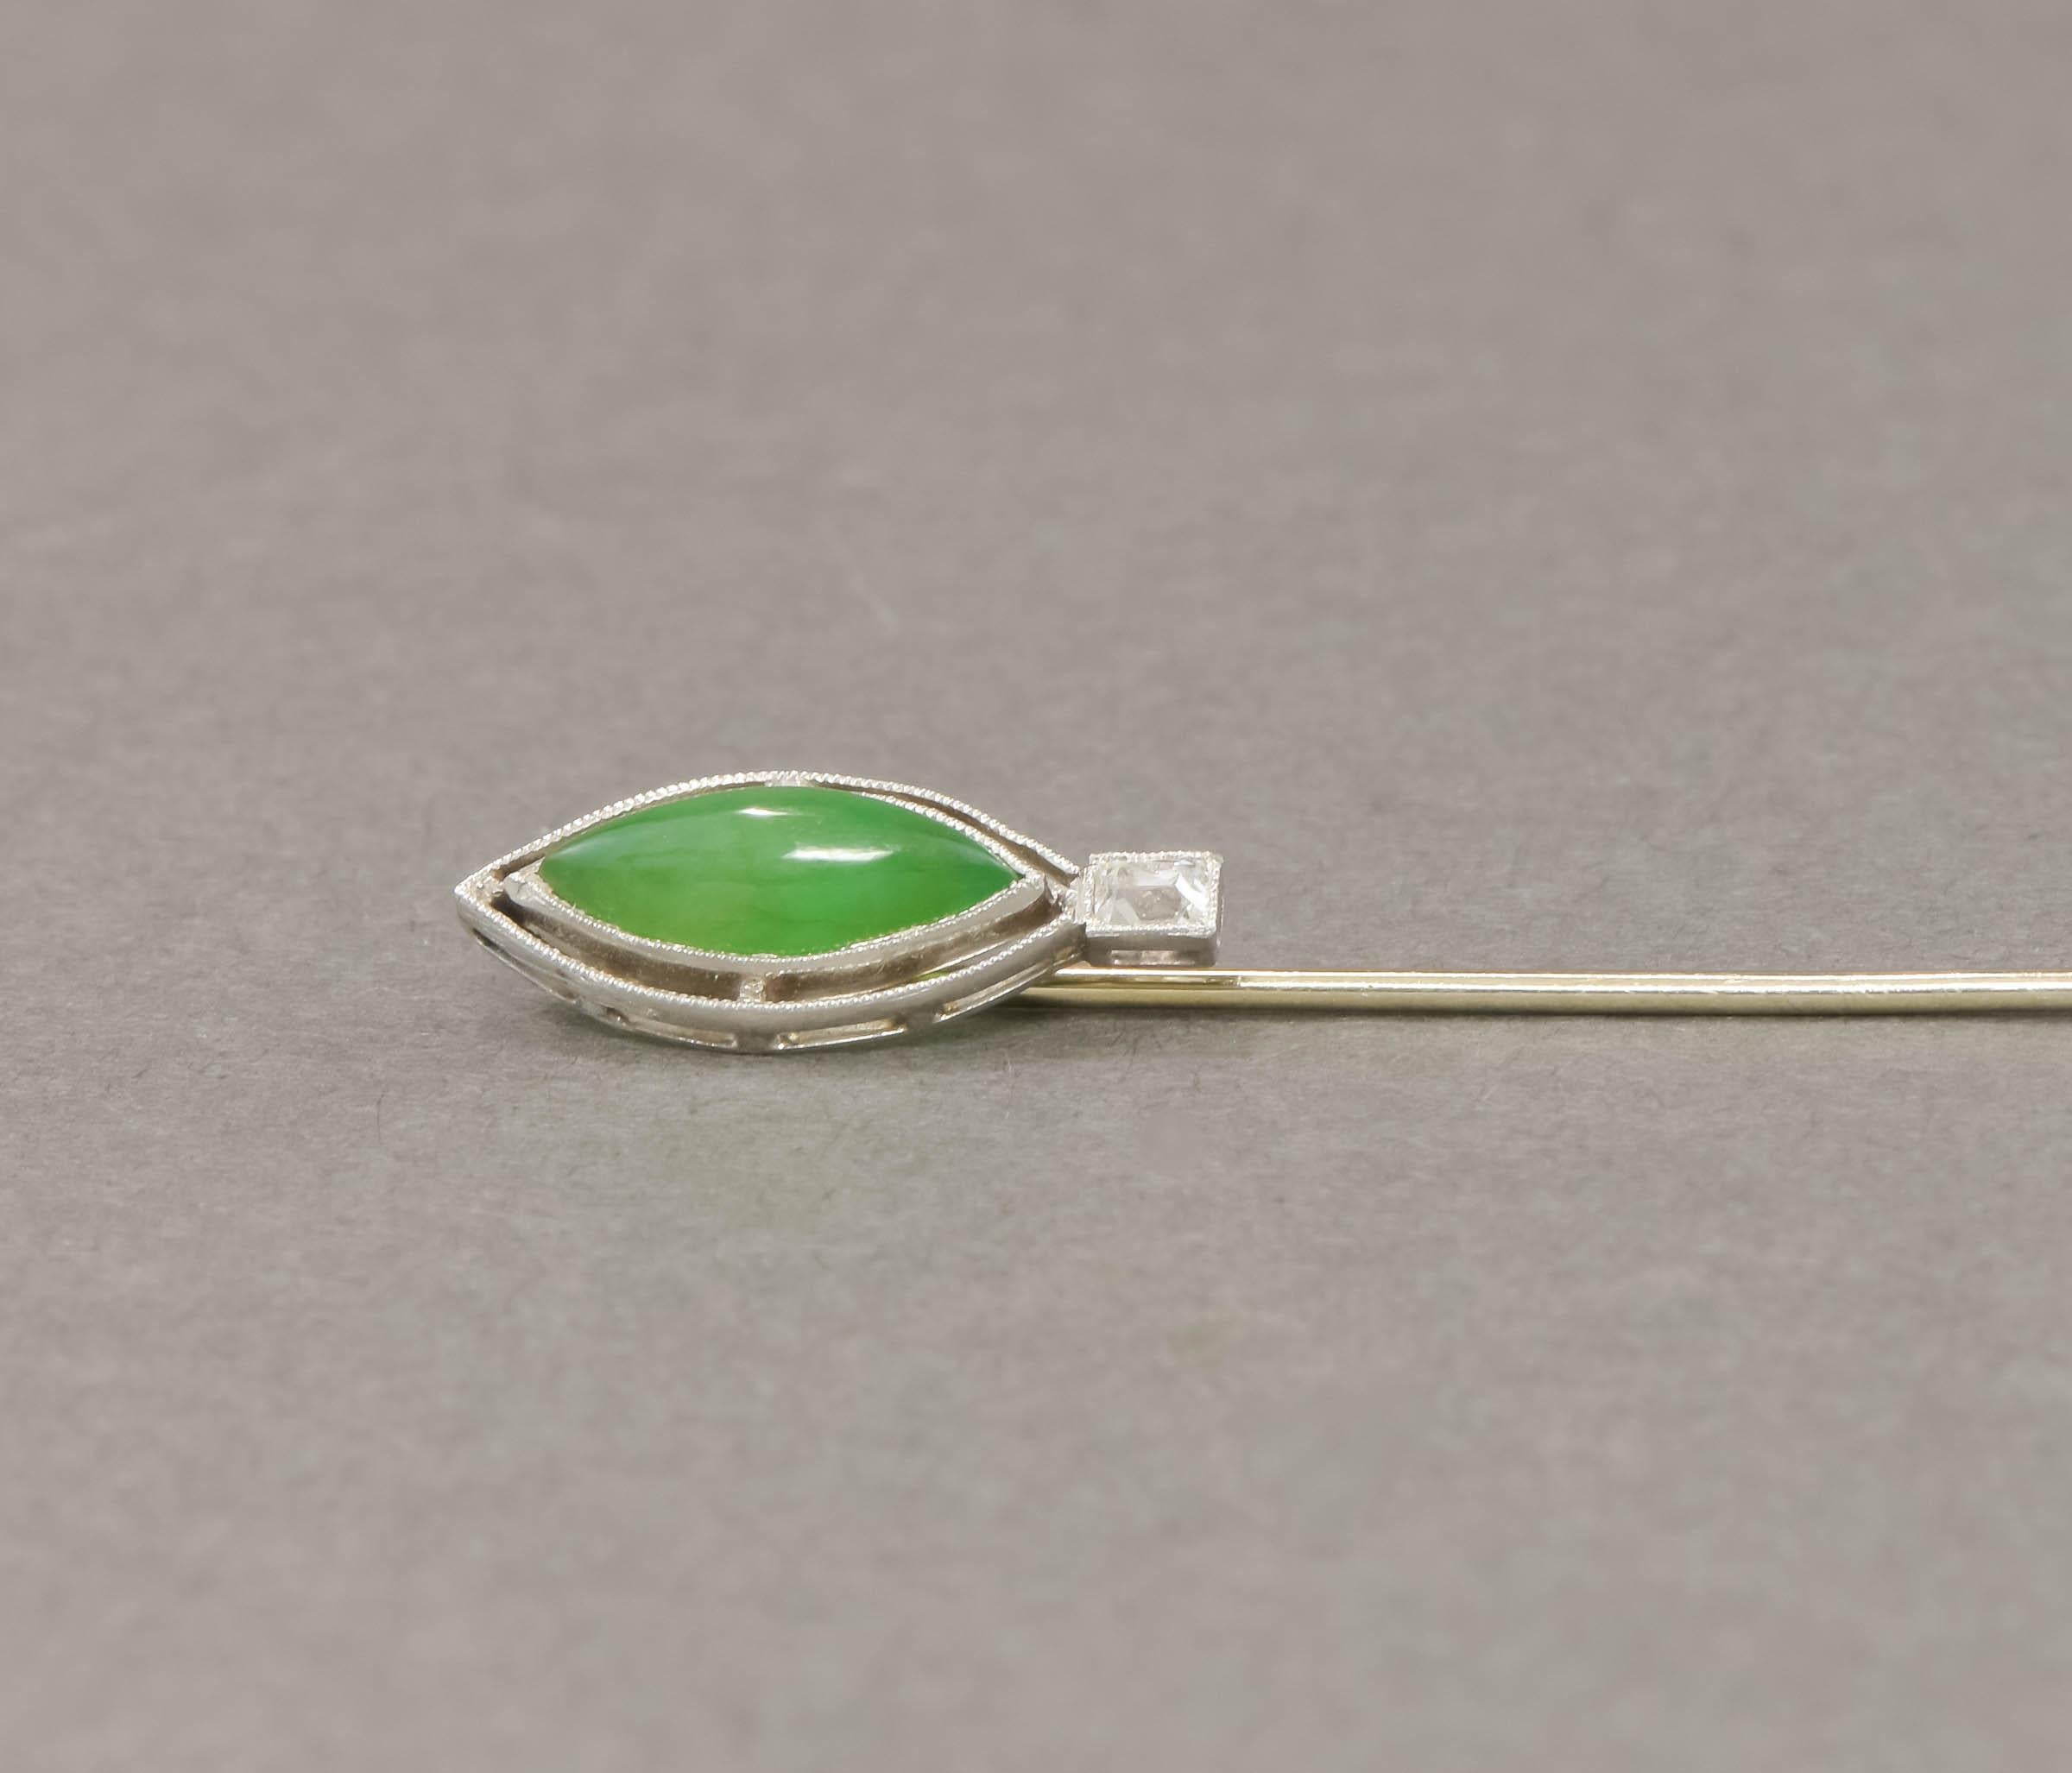 Offered is a very elegant Jadeite and diamond stick pin/cravat pin dating to the Edwardian to Art Deco period.

The jadeite jade and old cushion cut diamond are set in platinum bezels with crisp milgrain edging, while the pin stem tests as 18K white